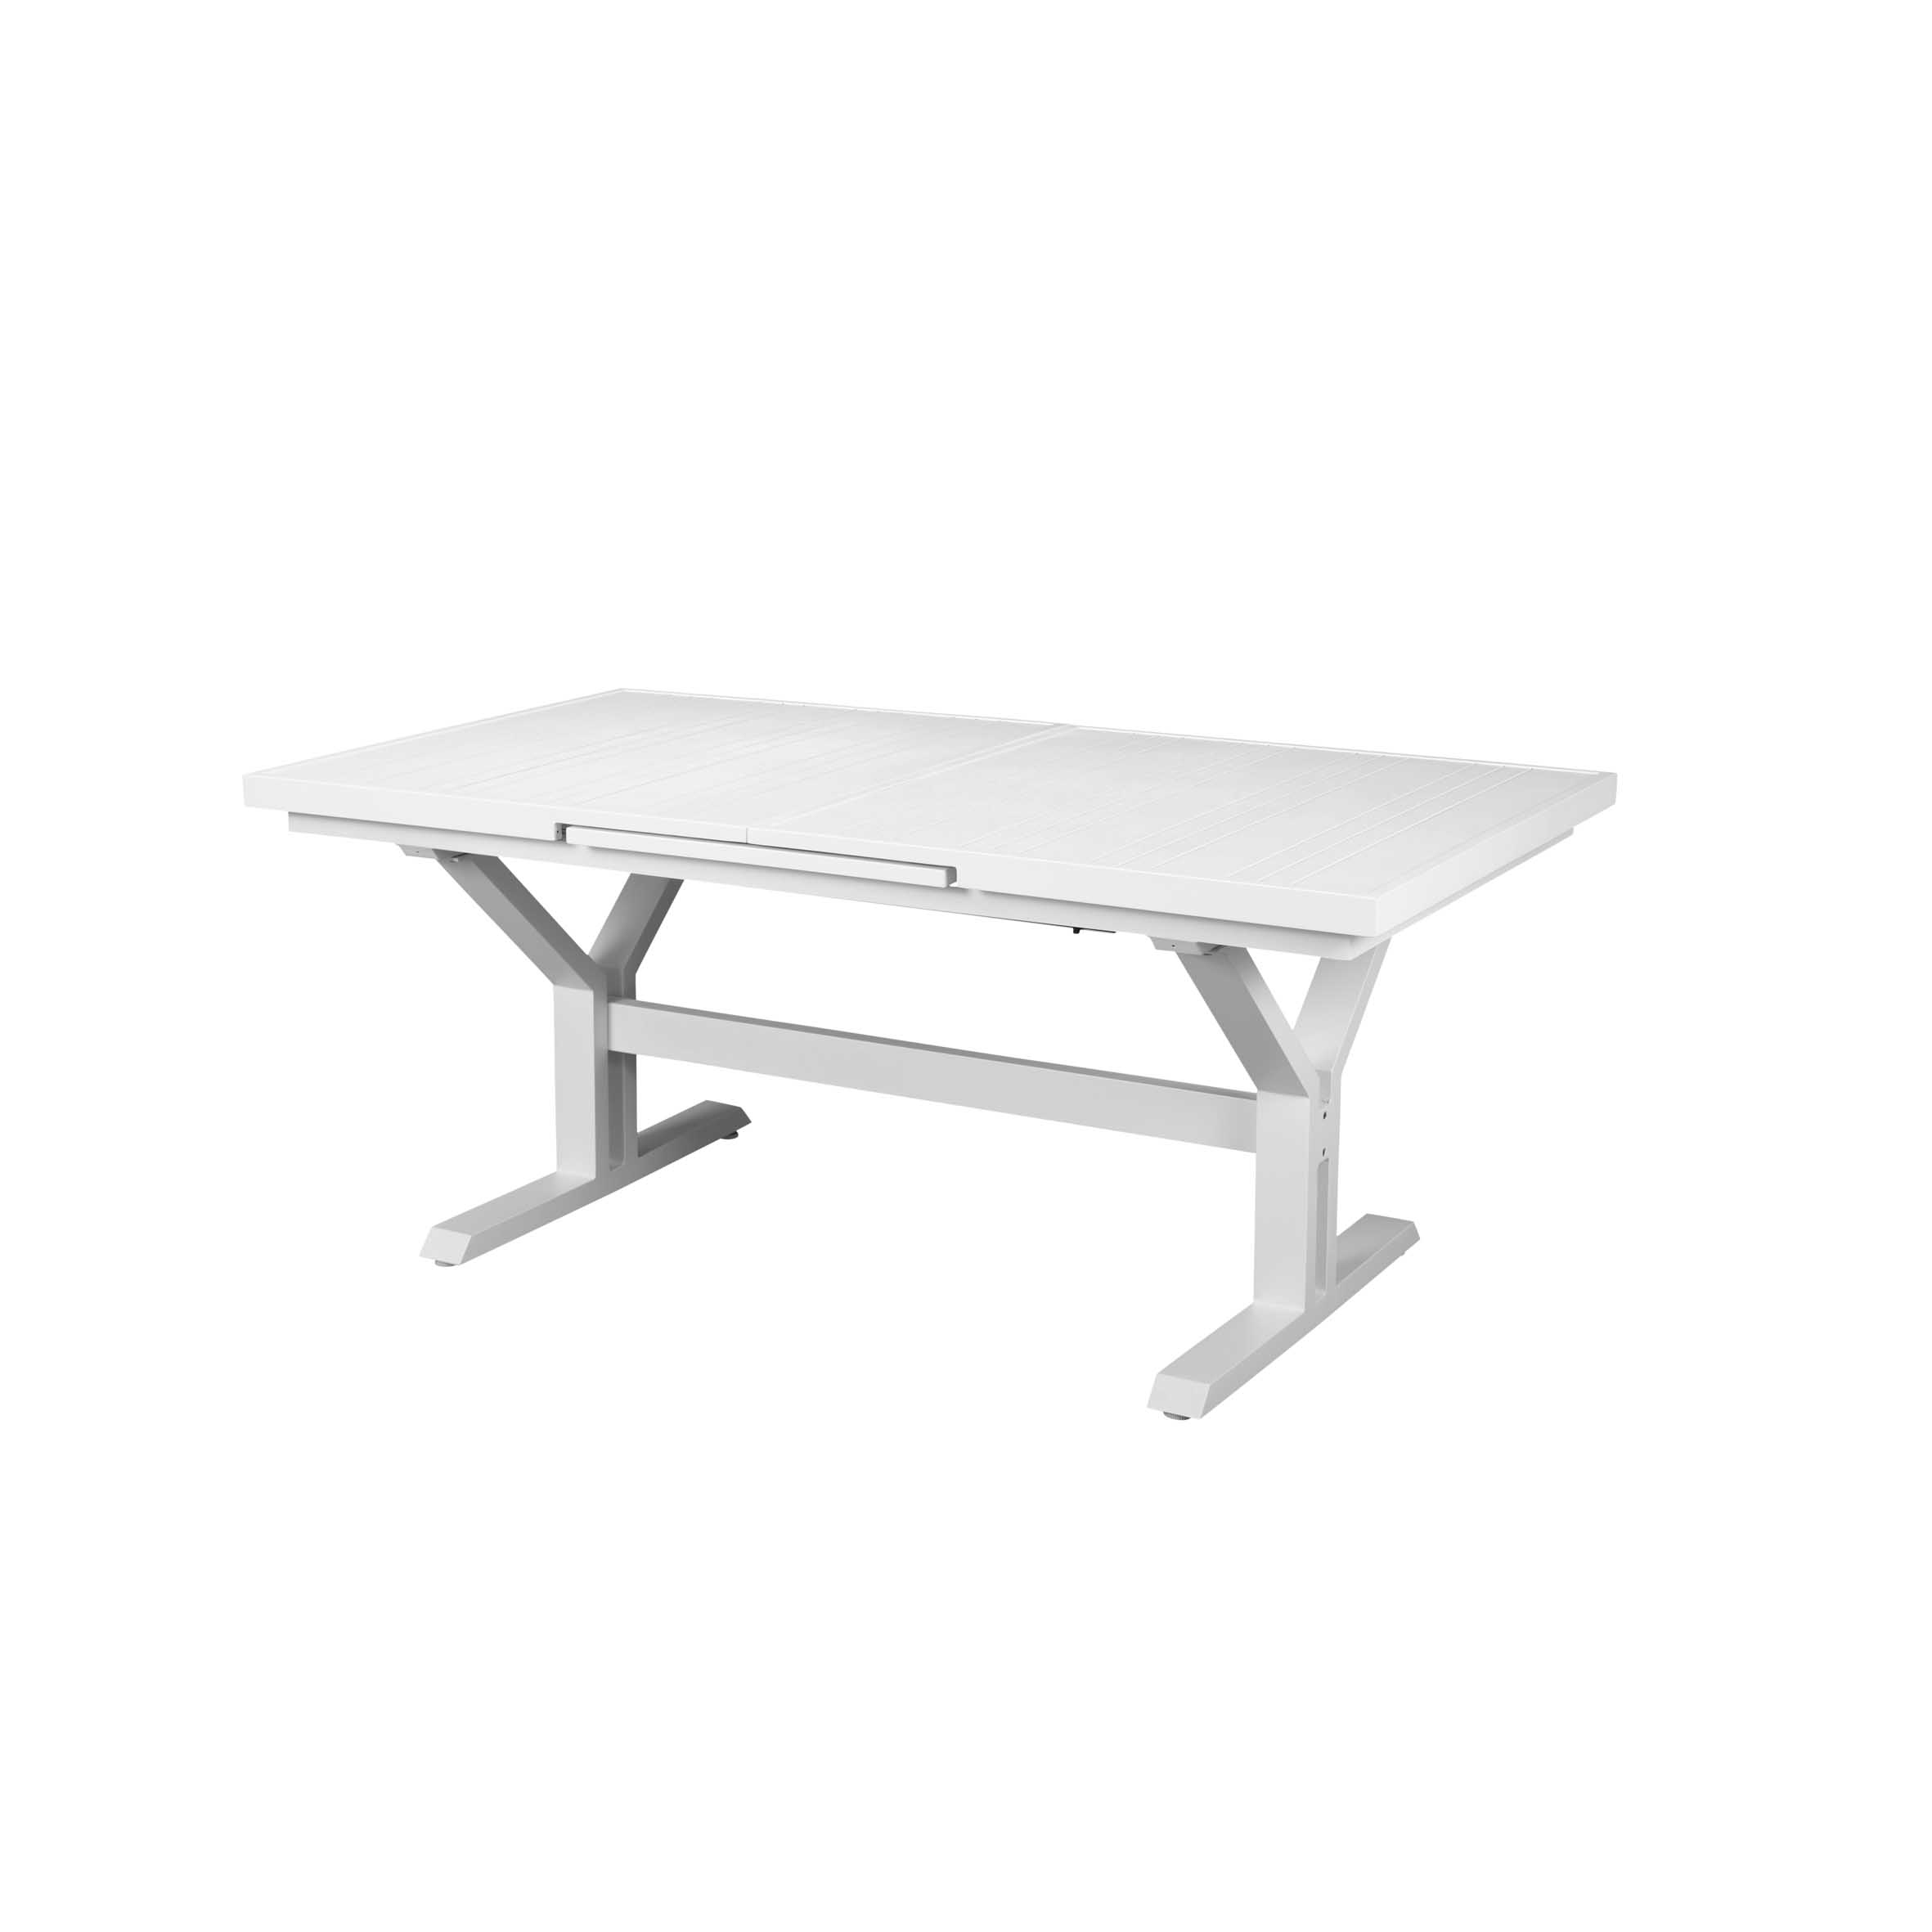 Tiffany auto extension table S2